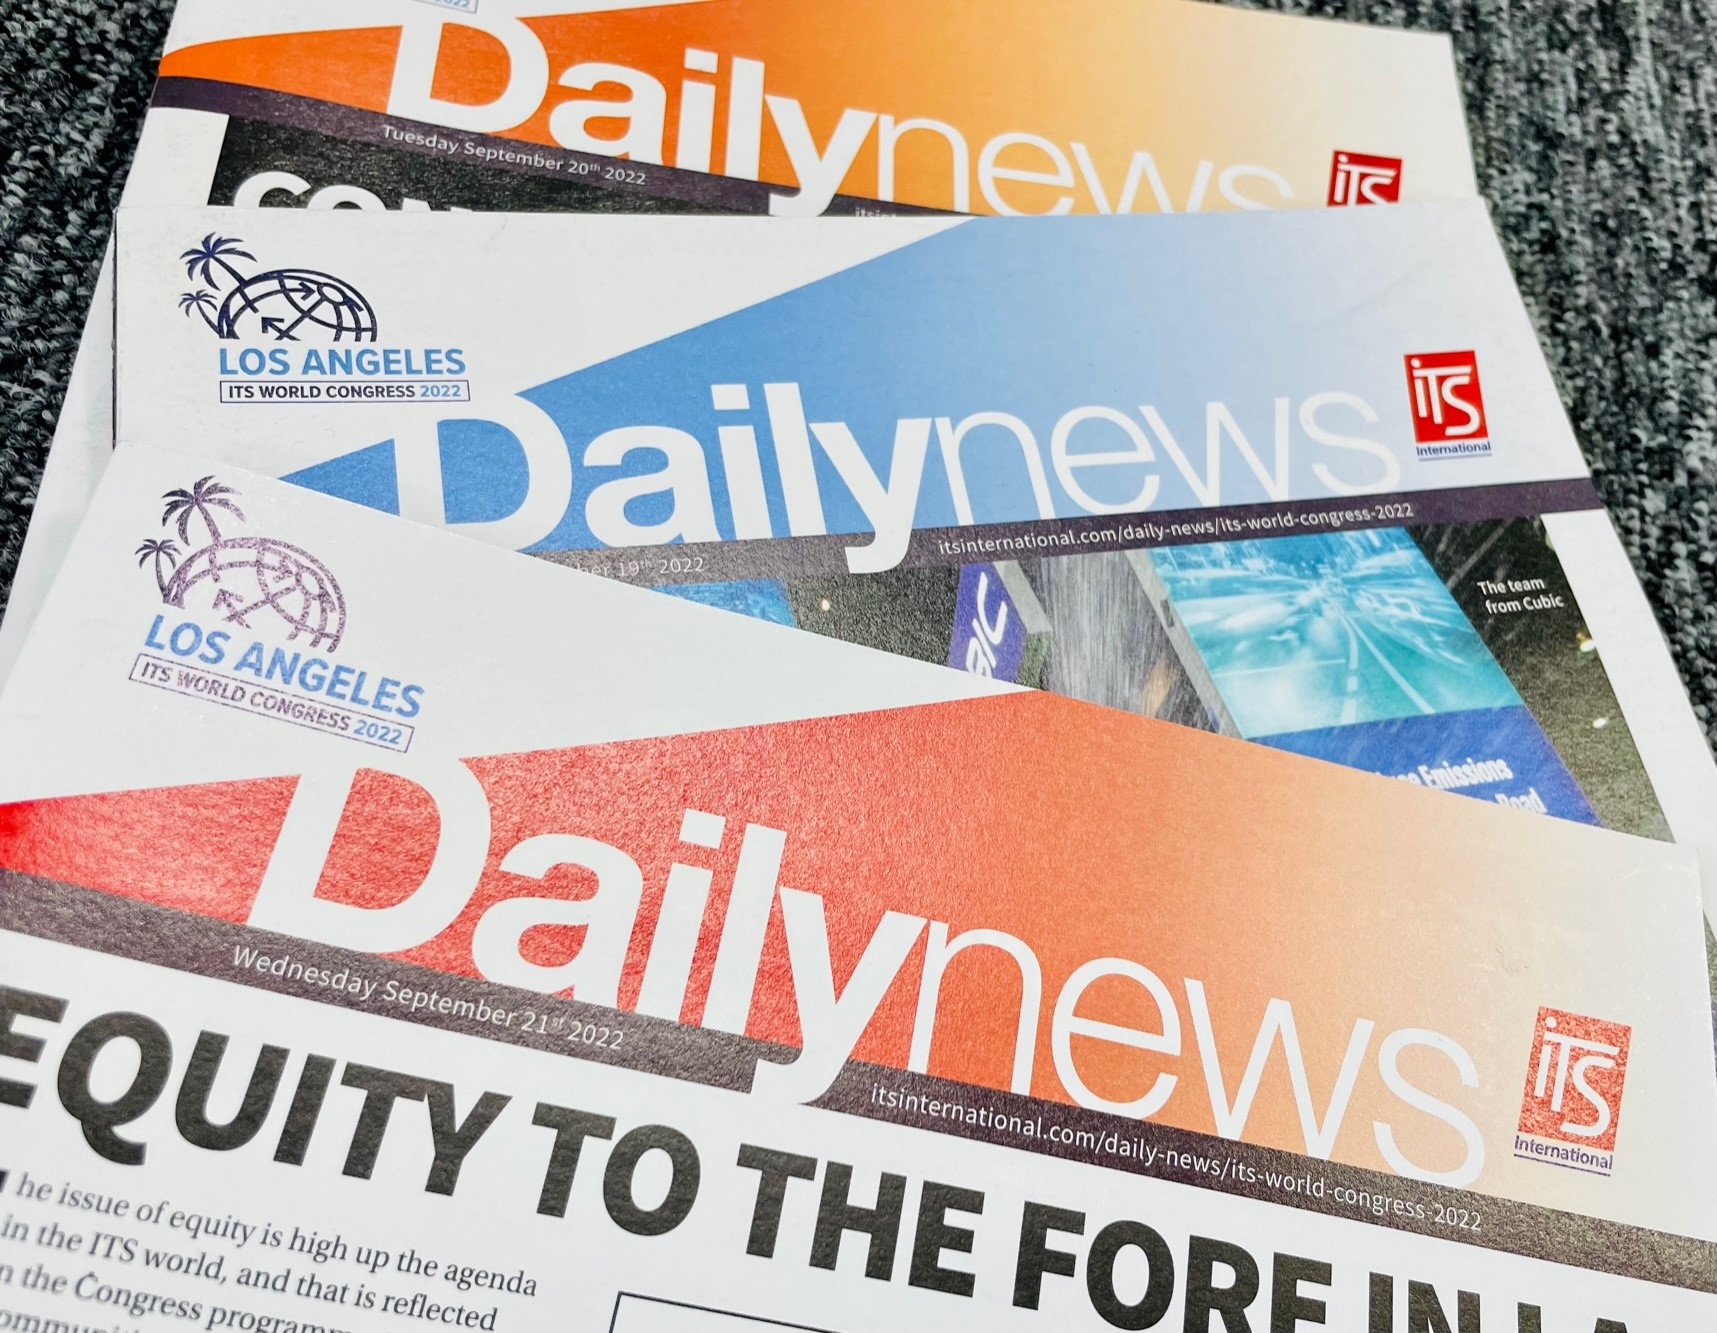 Daily News ITS America Conference & Expo Grapevine TX in-person events